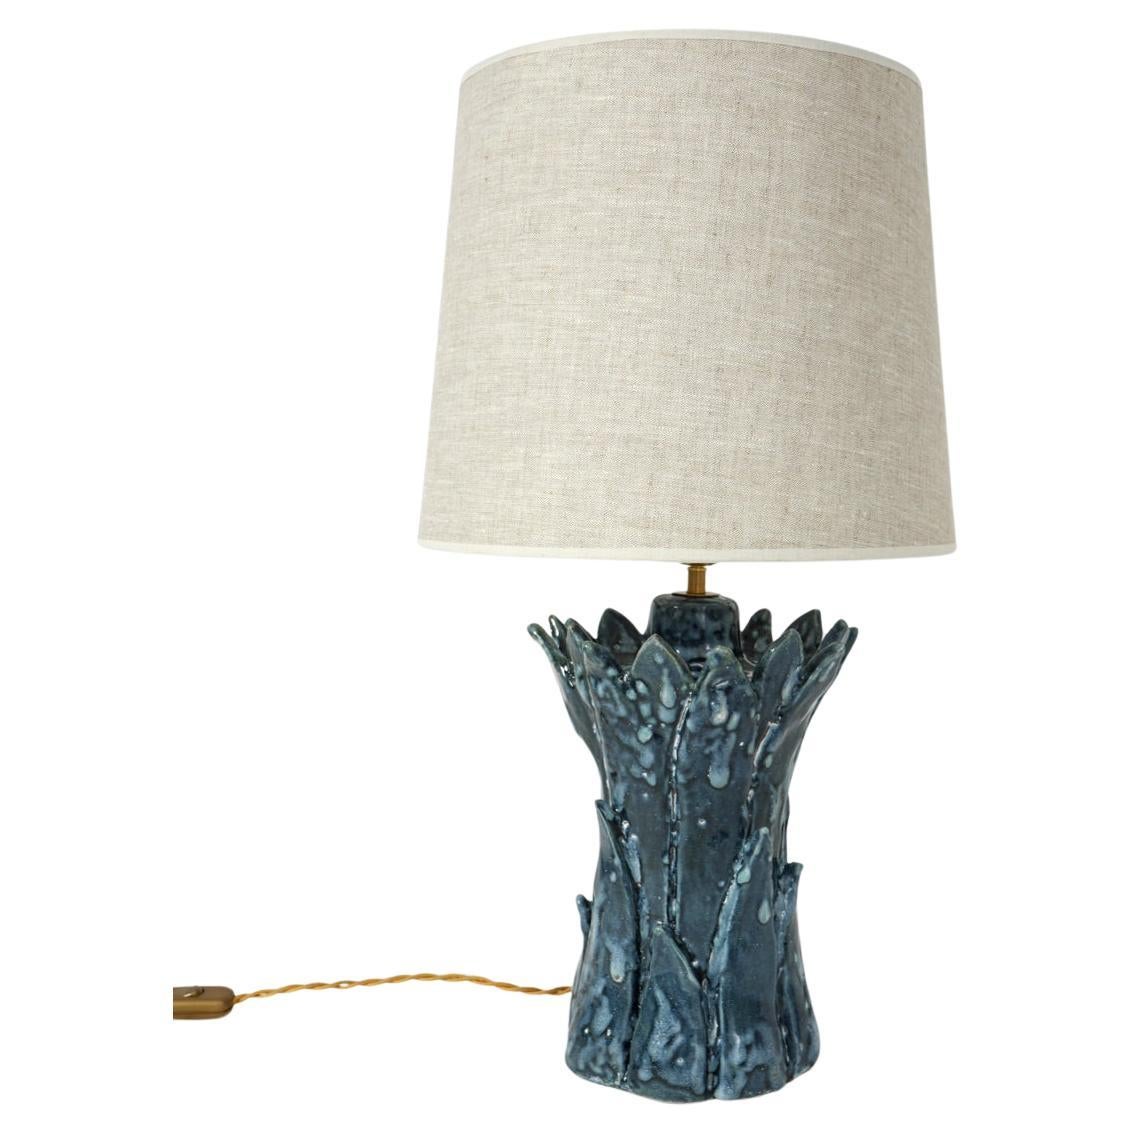 "Sintra" small blue table lamp. Barracuda edition. For Sale